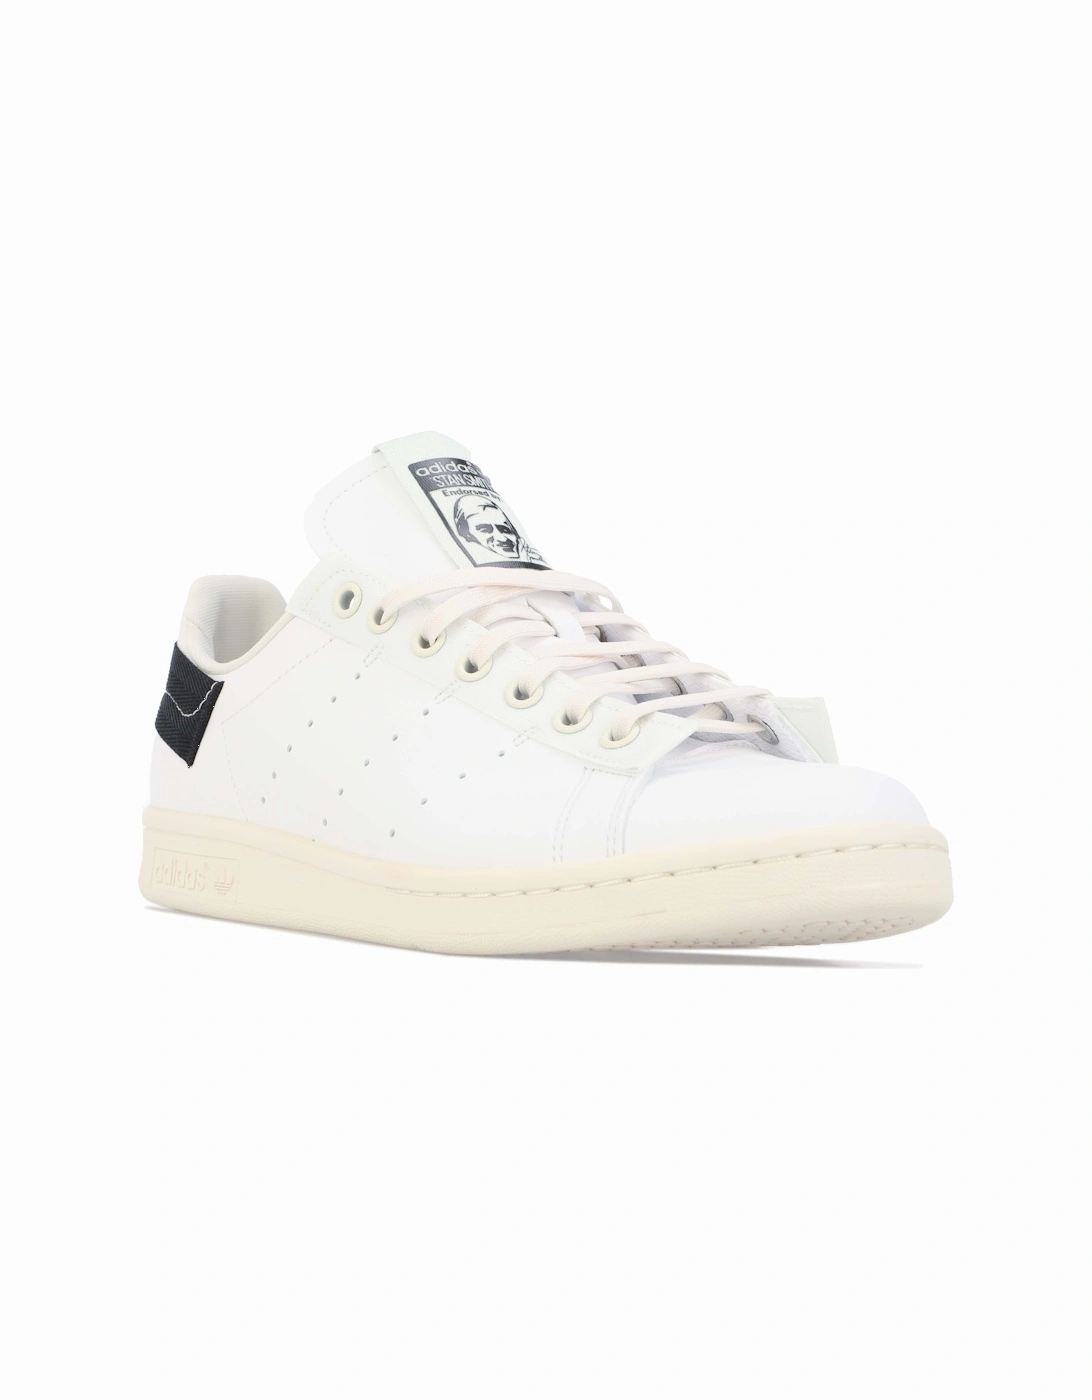 Men's Mens Stan Smith Parley Trainers - White - Size: 4.5